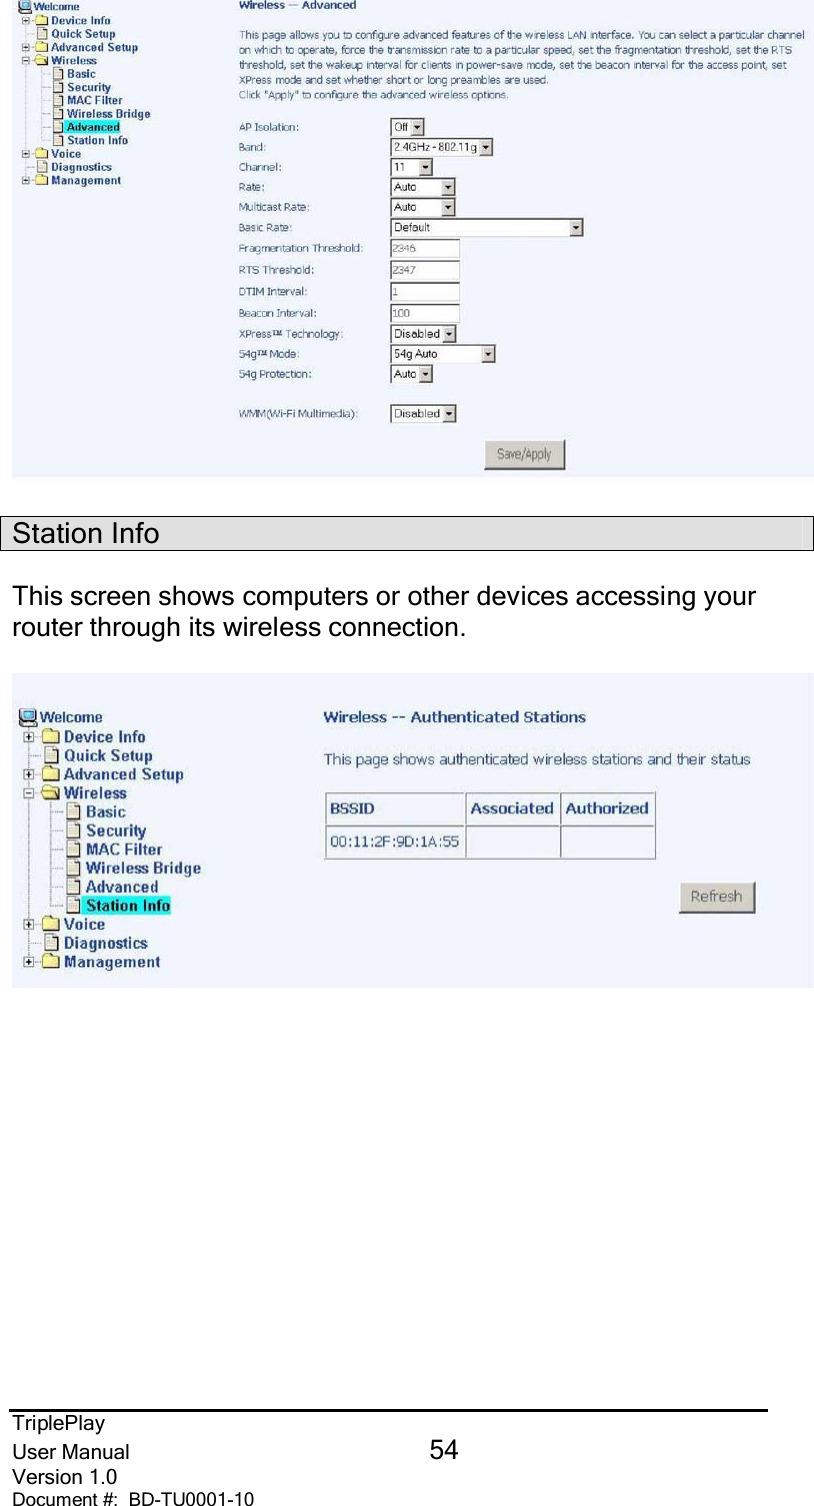 TriplePlayUser Manual 54Version 1.0Document #:  BD-TU0001-10Station InfoThis screen shows computers or other devices accessing yourrouter through its wireless connection.